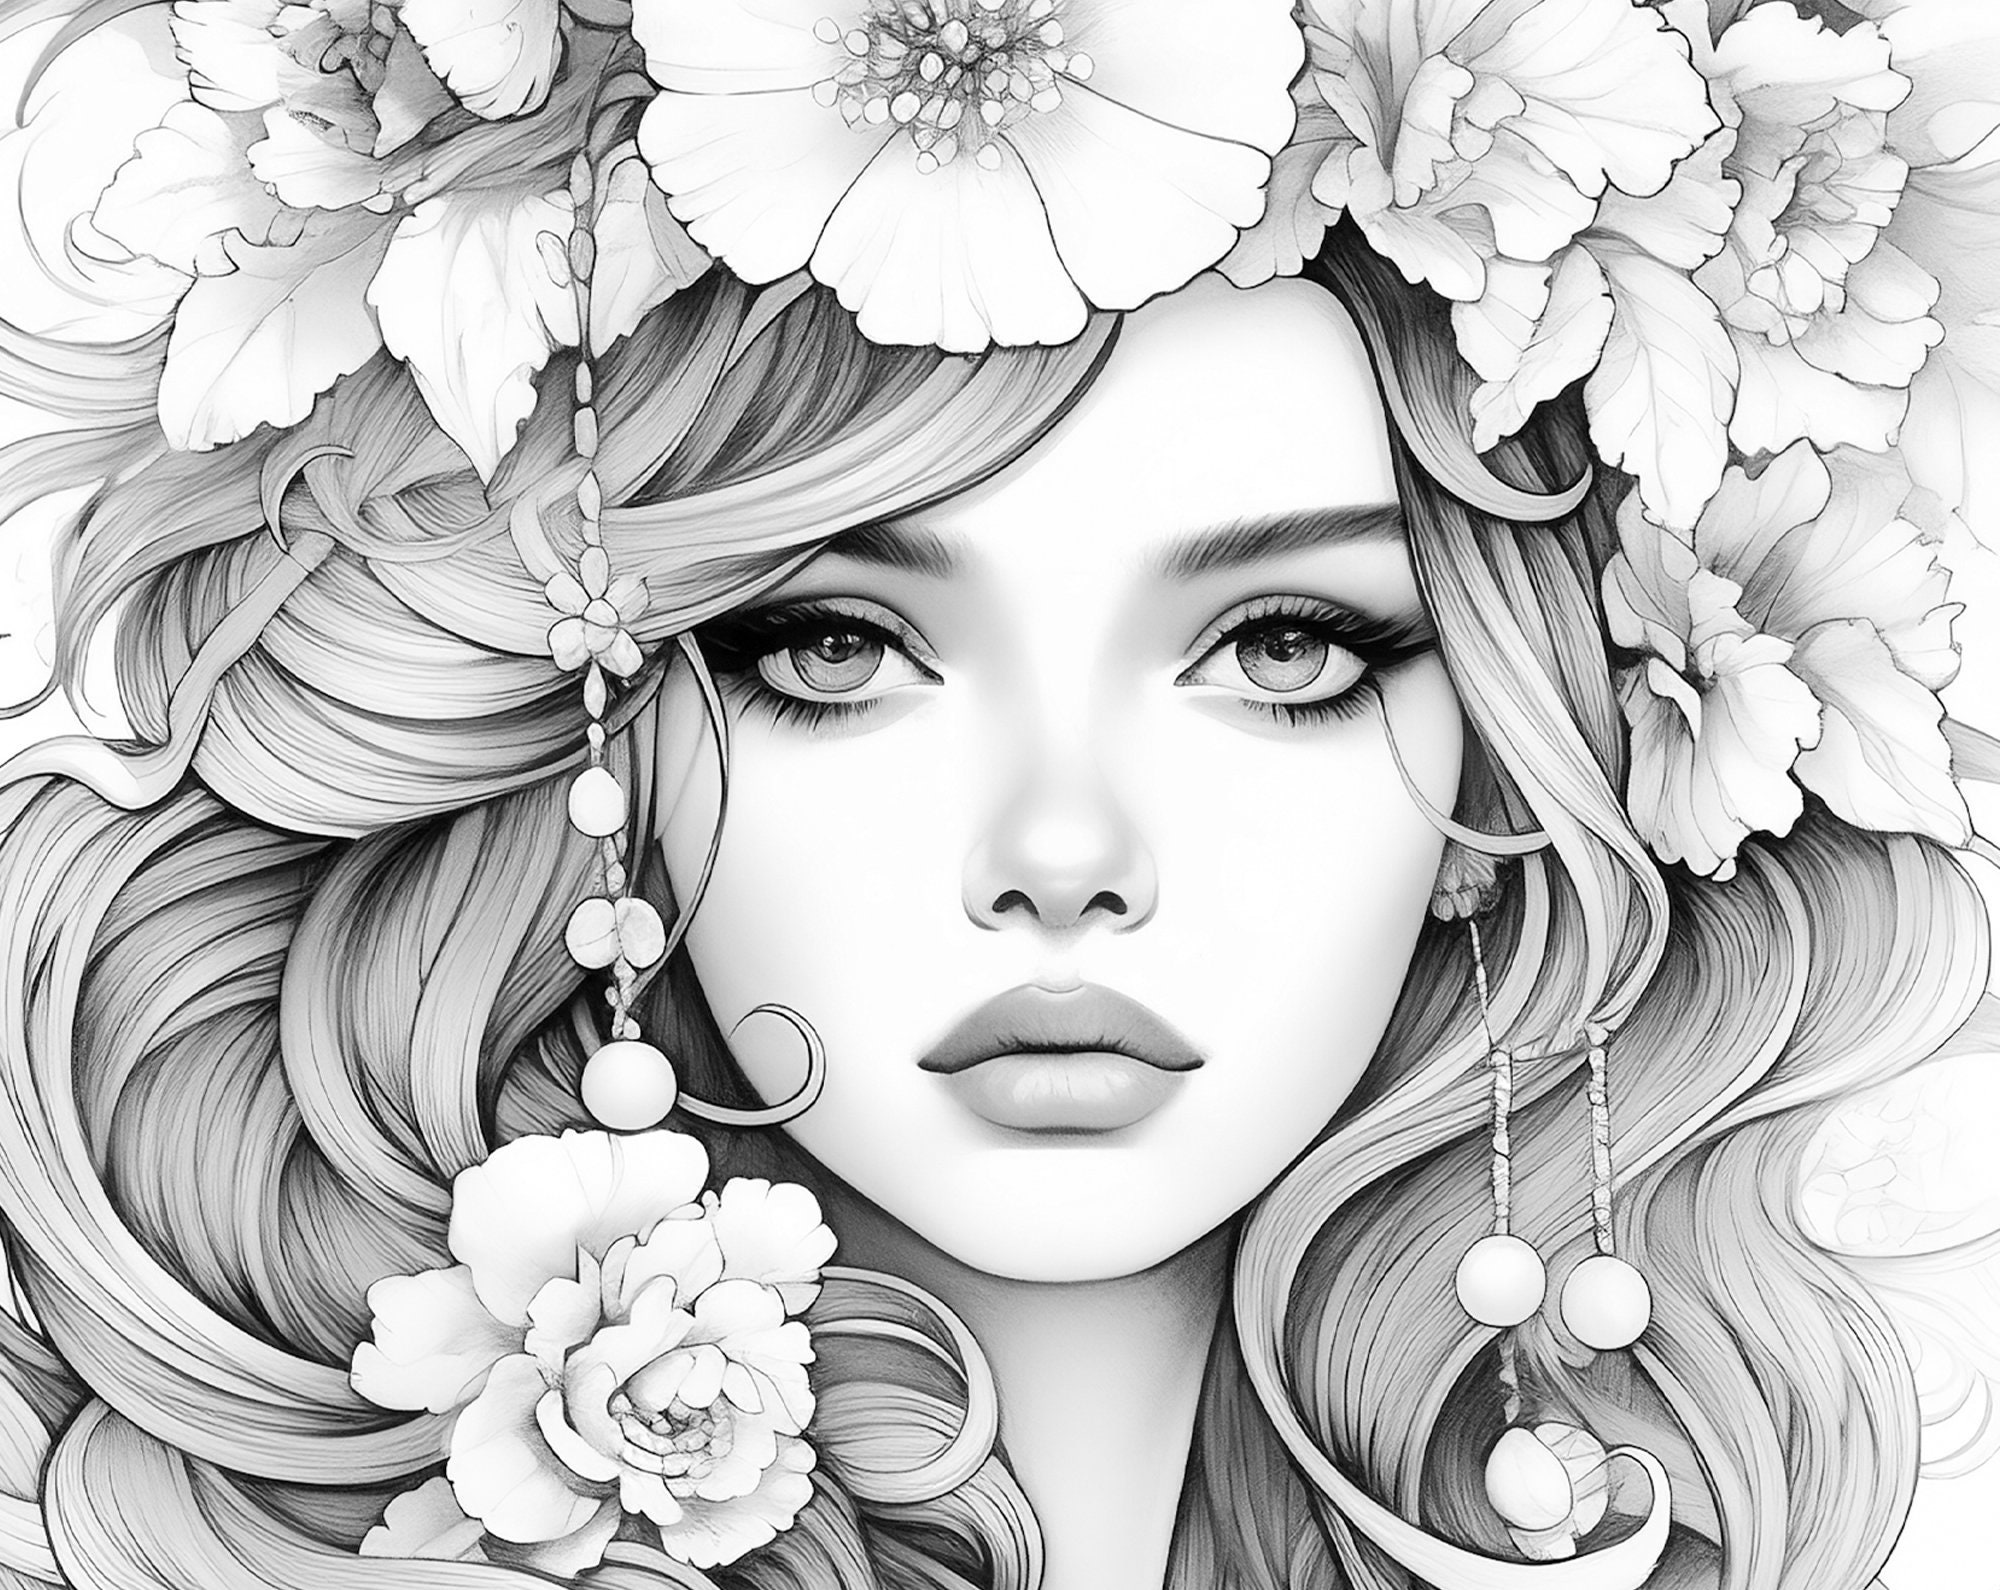 Coloring Book For Girls Elegant Pretty Girl Coloring Pages For